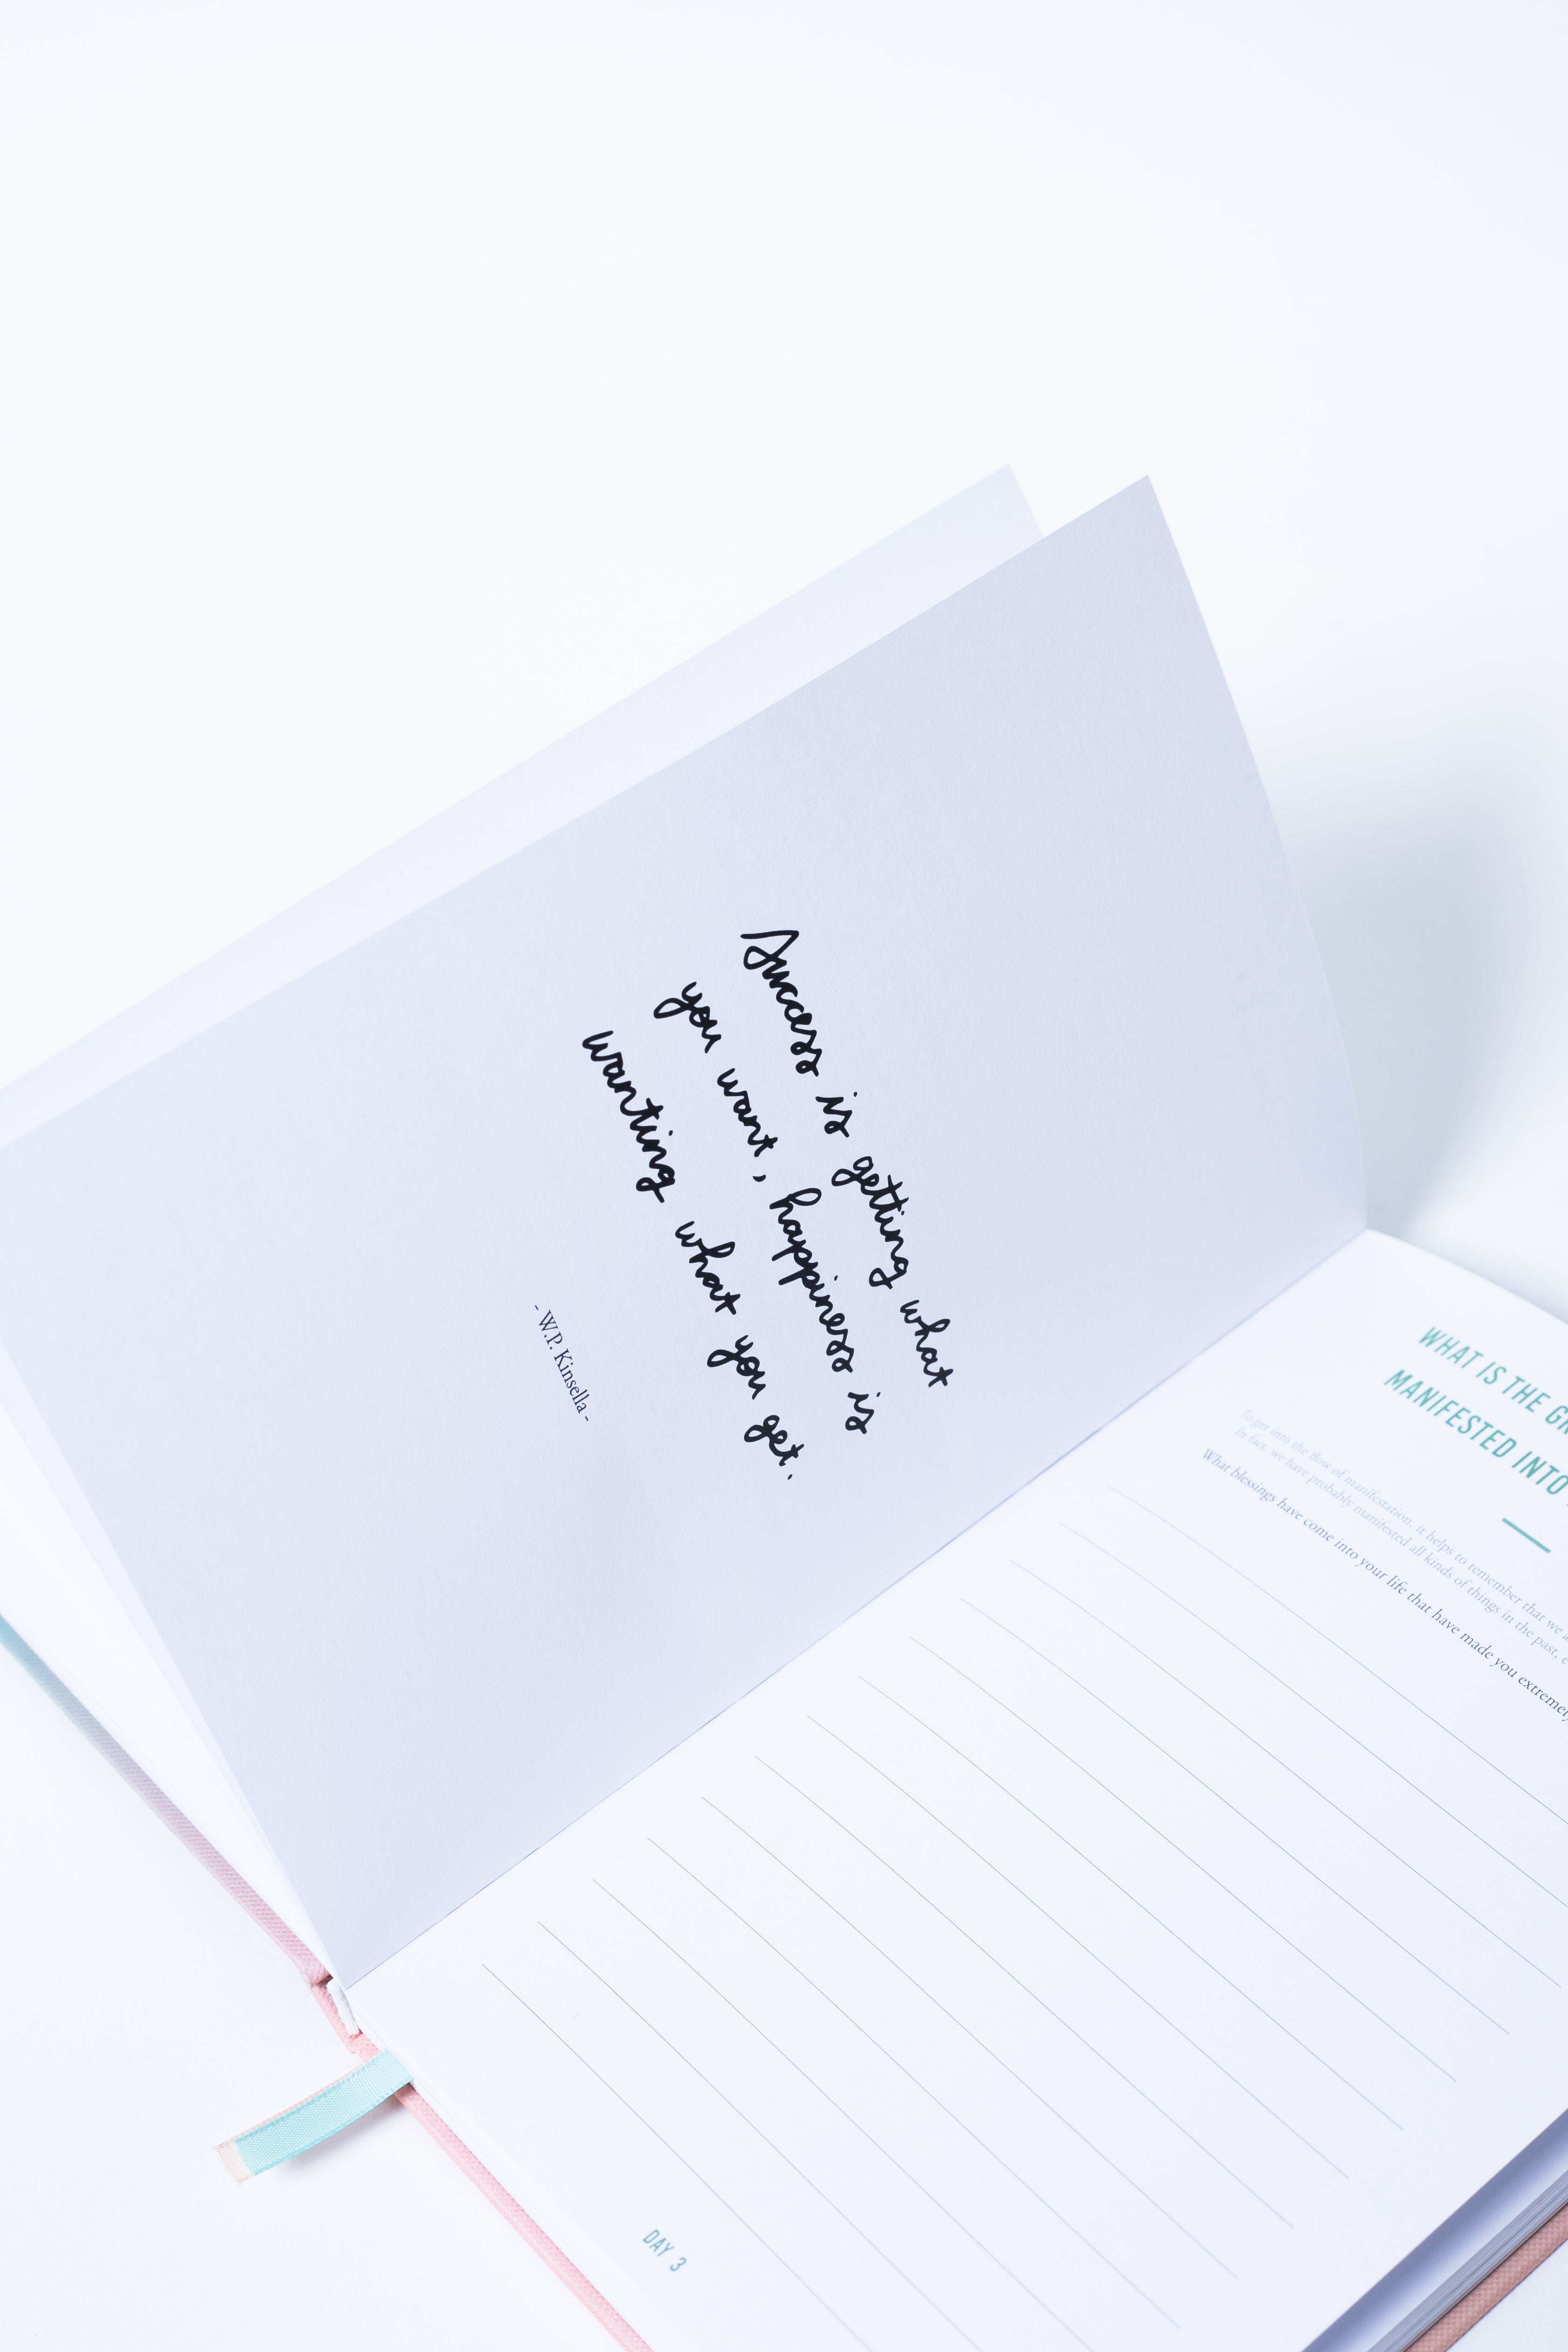 Explore Your Inner World | Guided Journal Set I - The Happiness Planner®